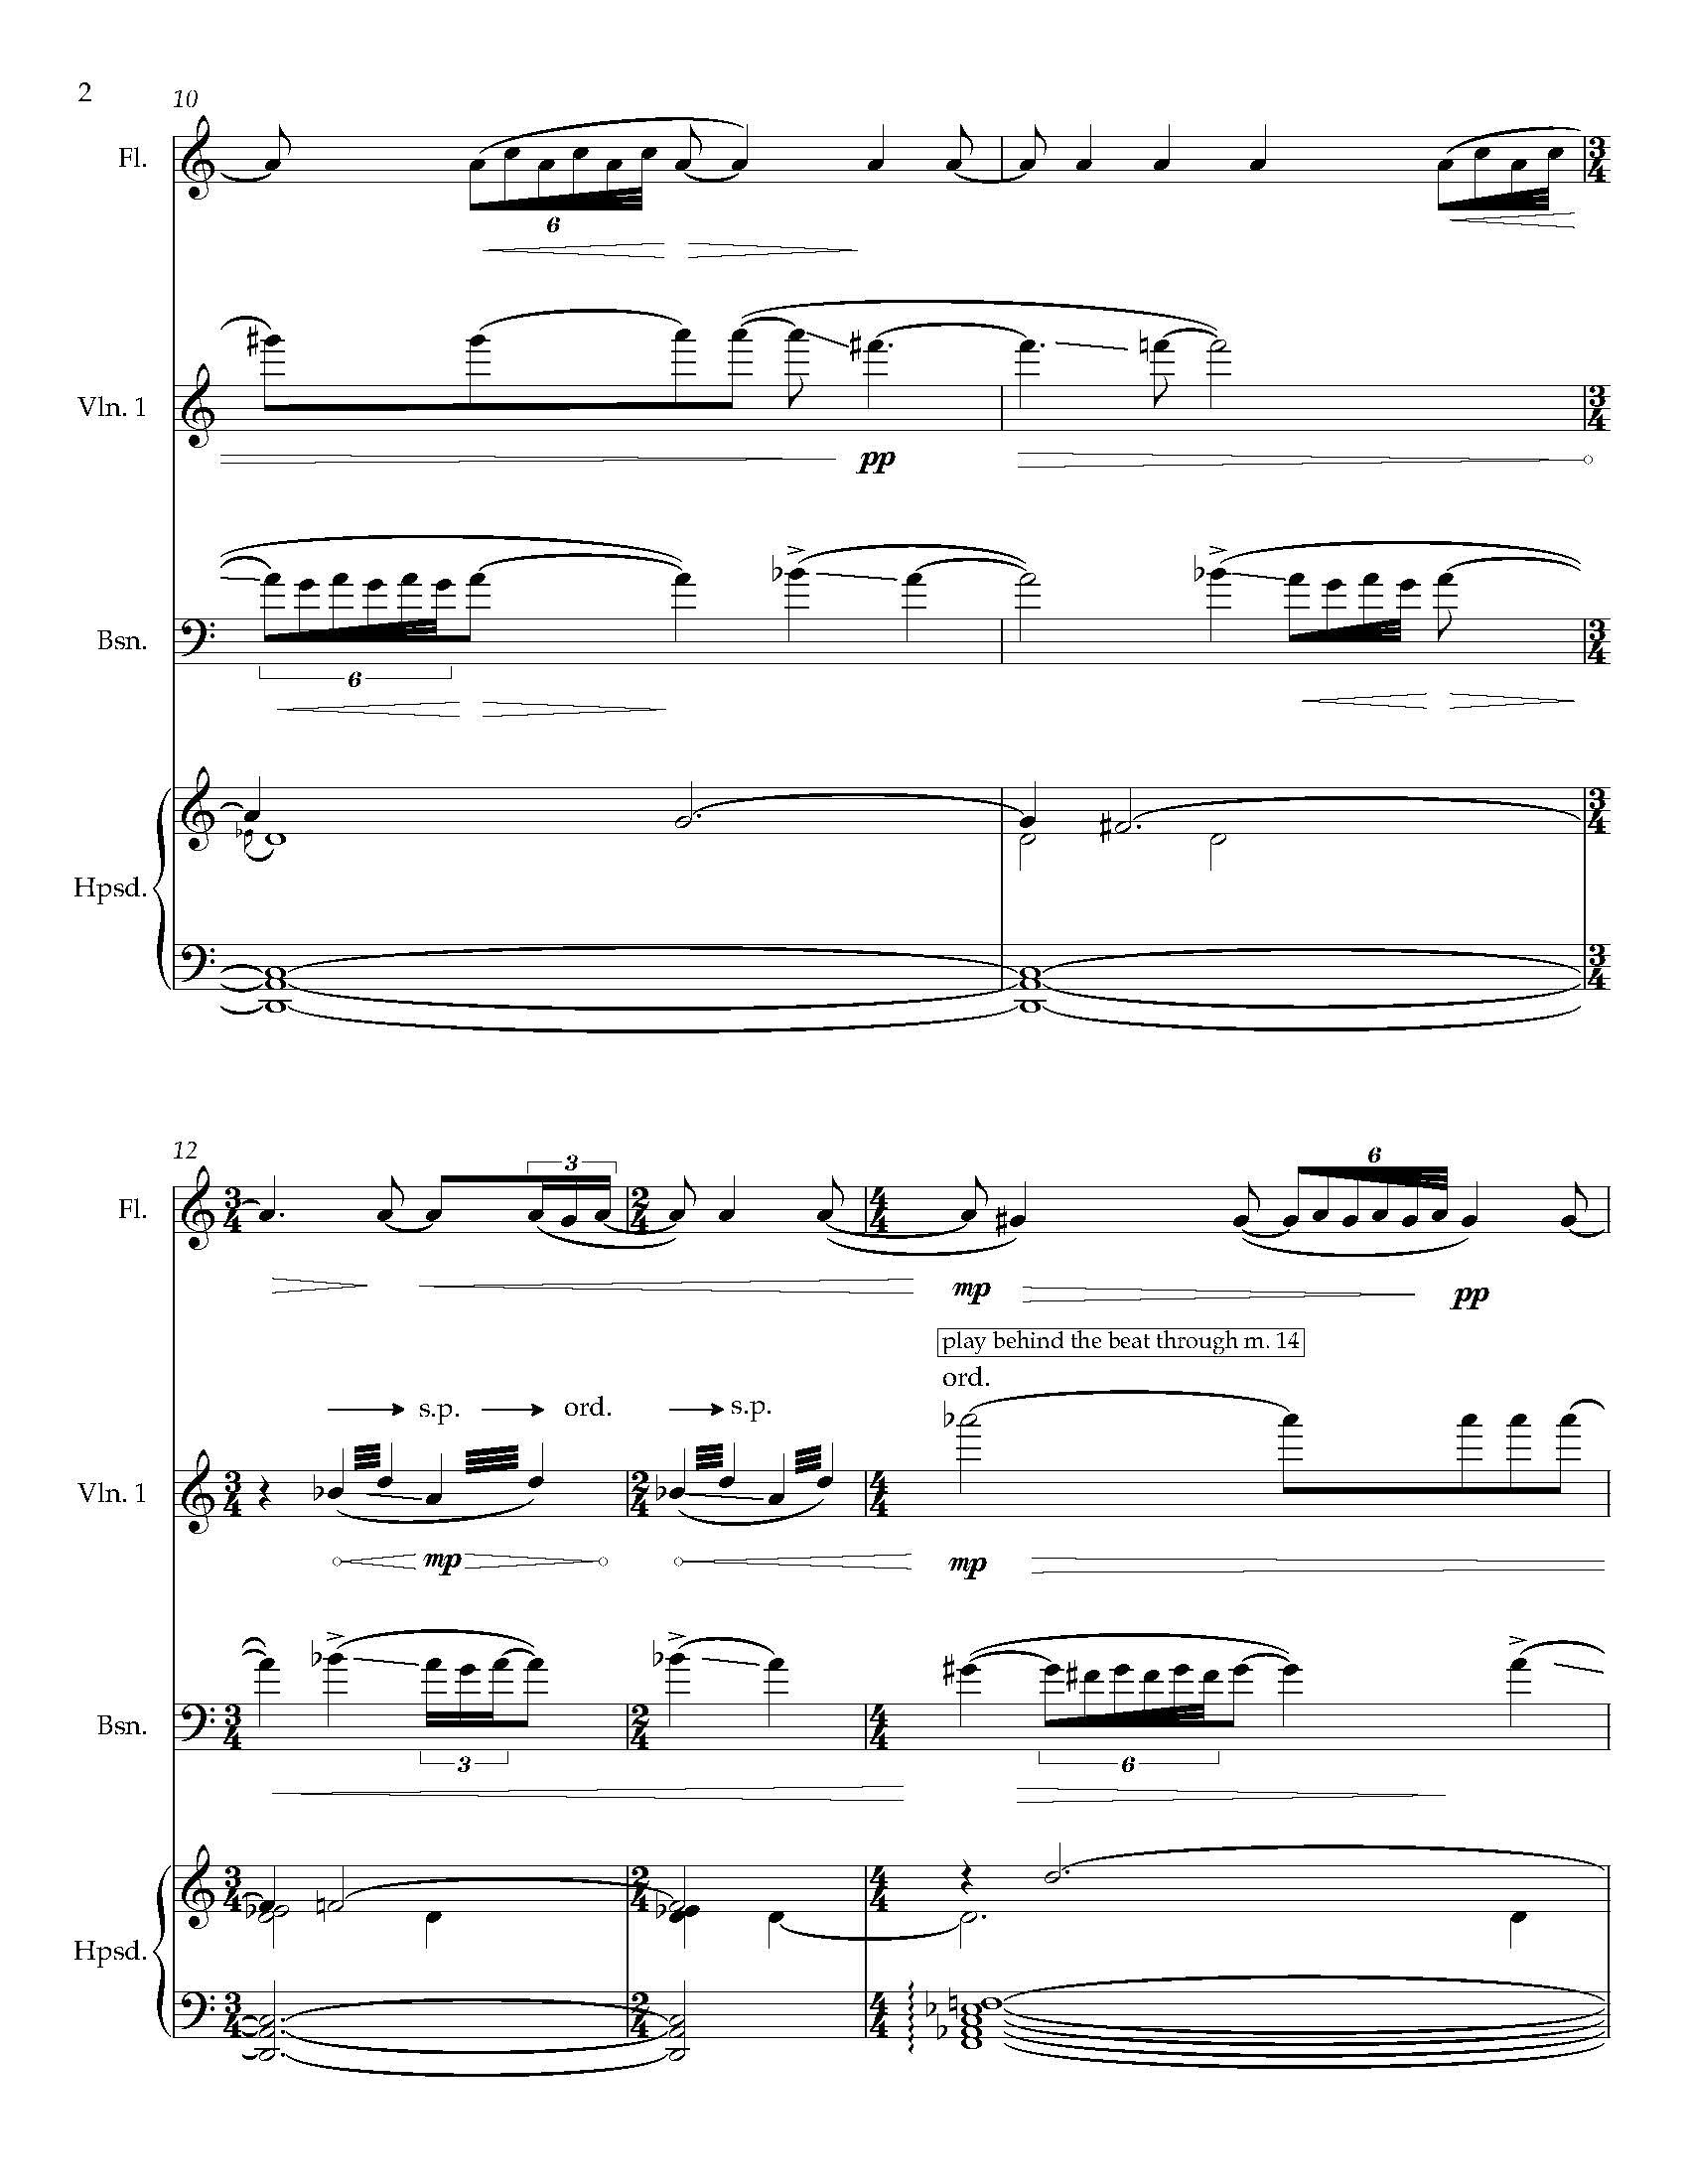 The Hourglass Equation - Complete Score_Page_08.jpg